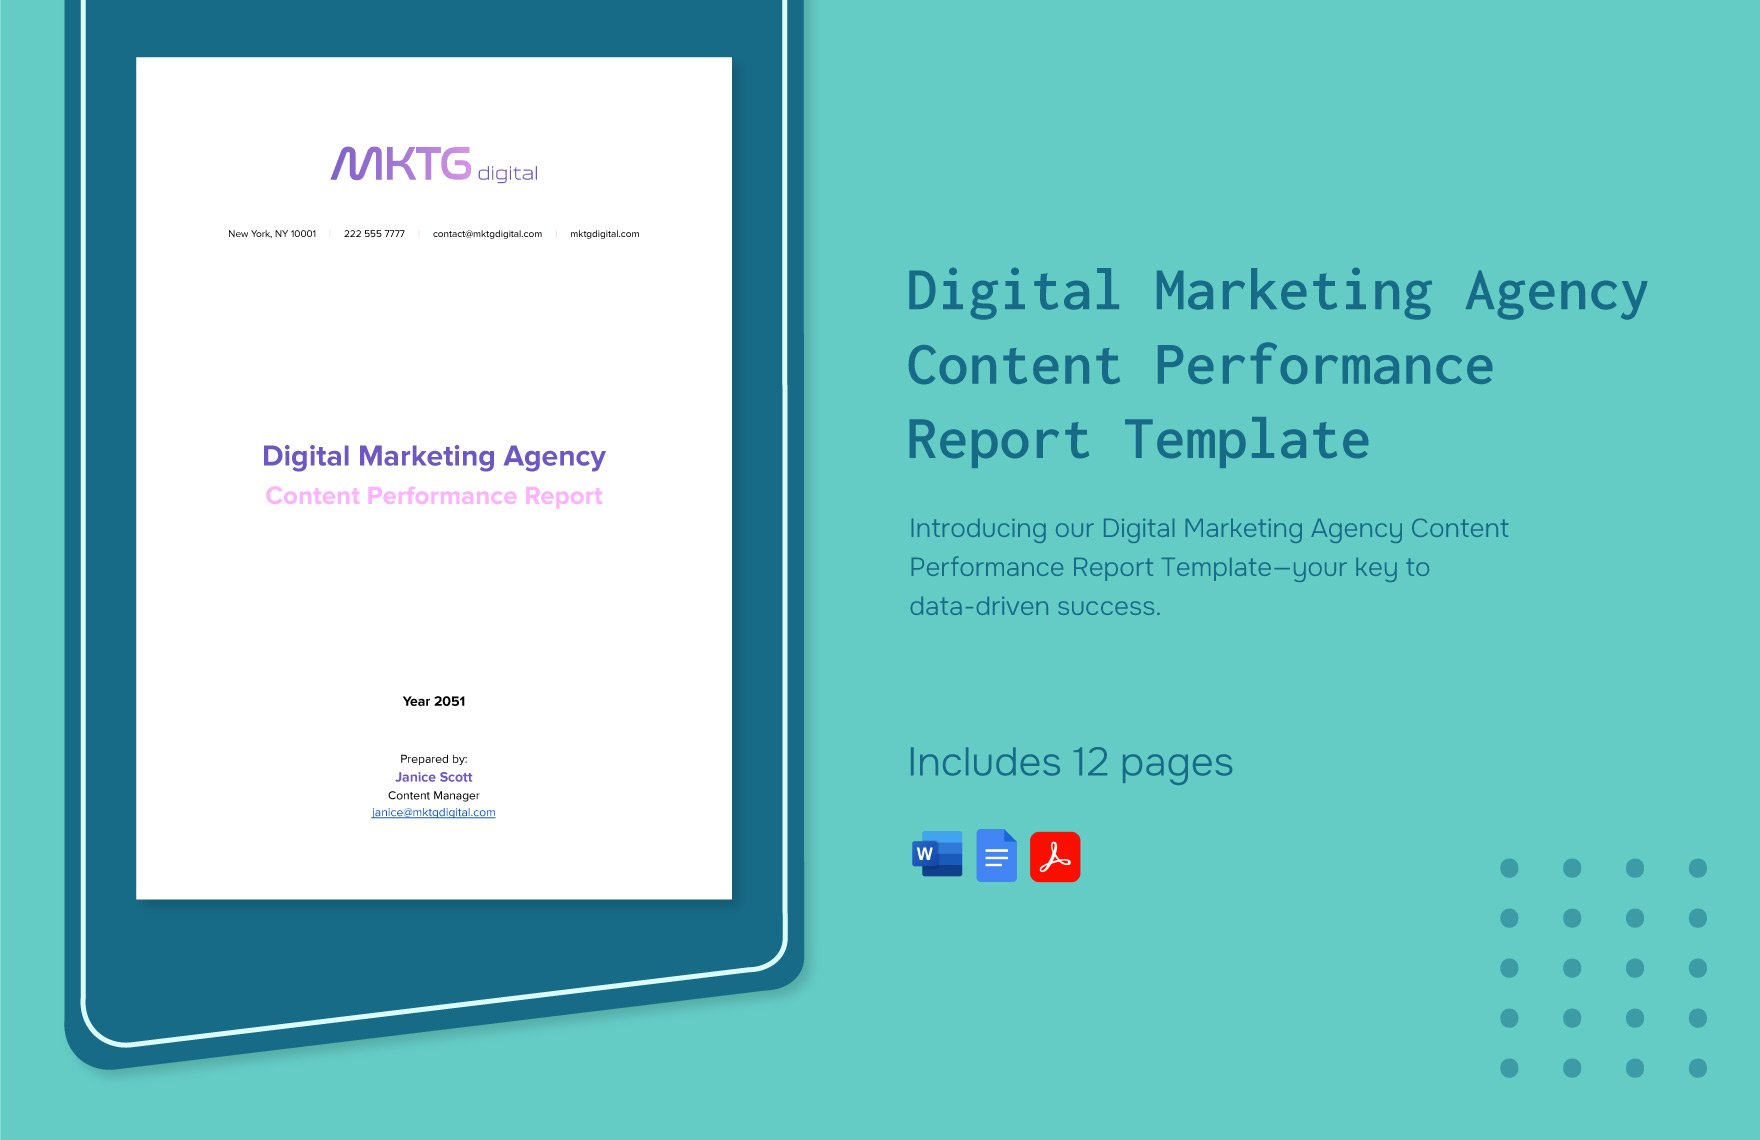 Digital Marketing Agency Content Performance Report Template in Word, Google Docs, PDF